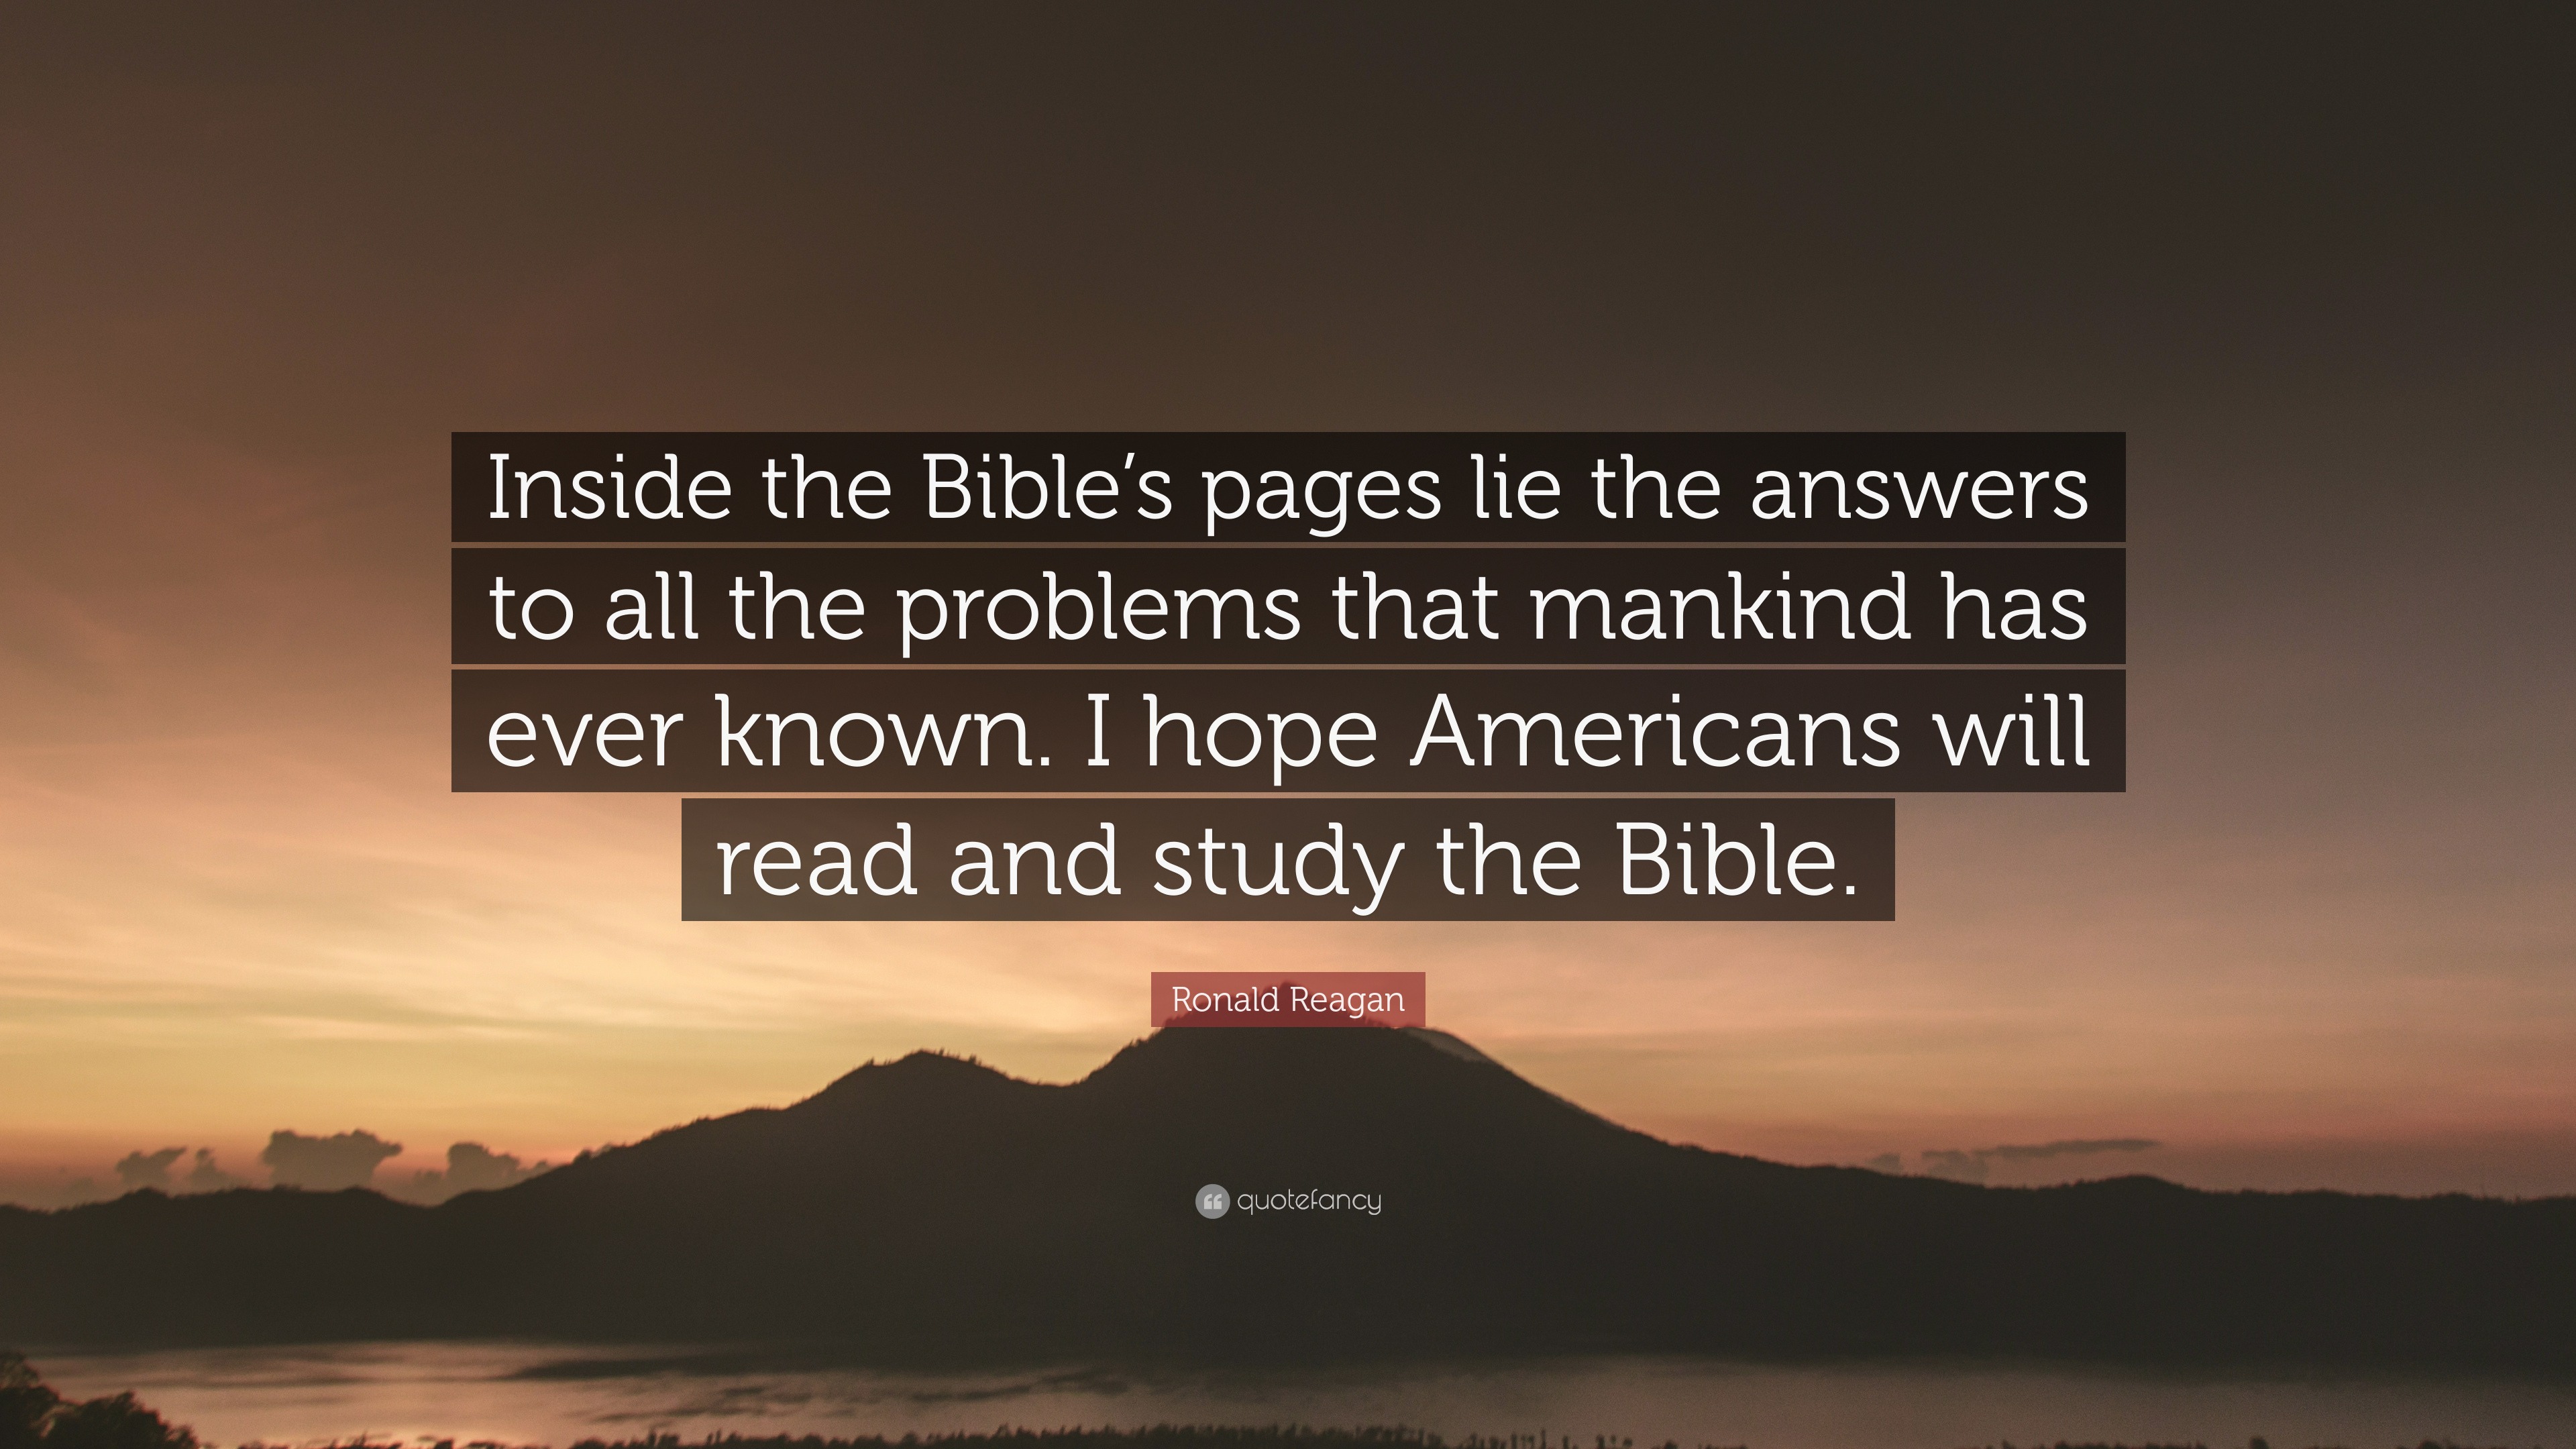 Ronald Reagan Quote: “Inside the Bible’s pages lie the answers to all